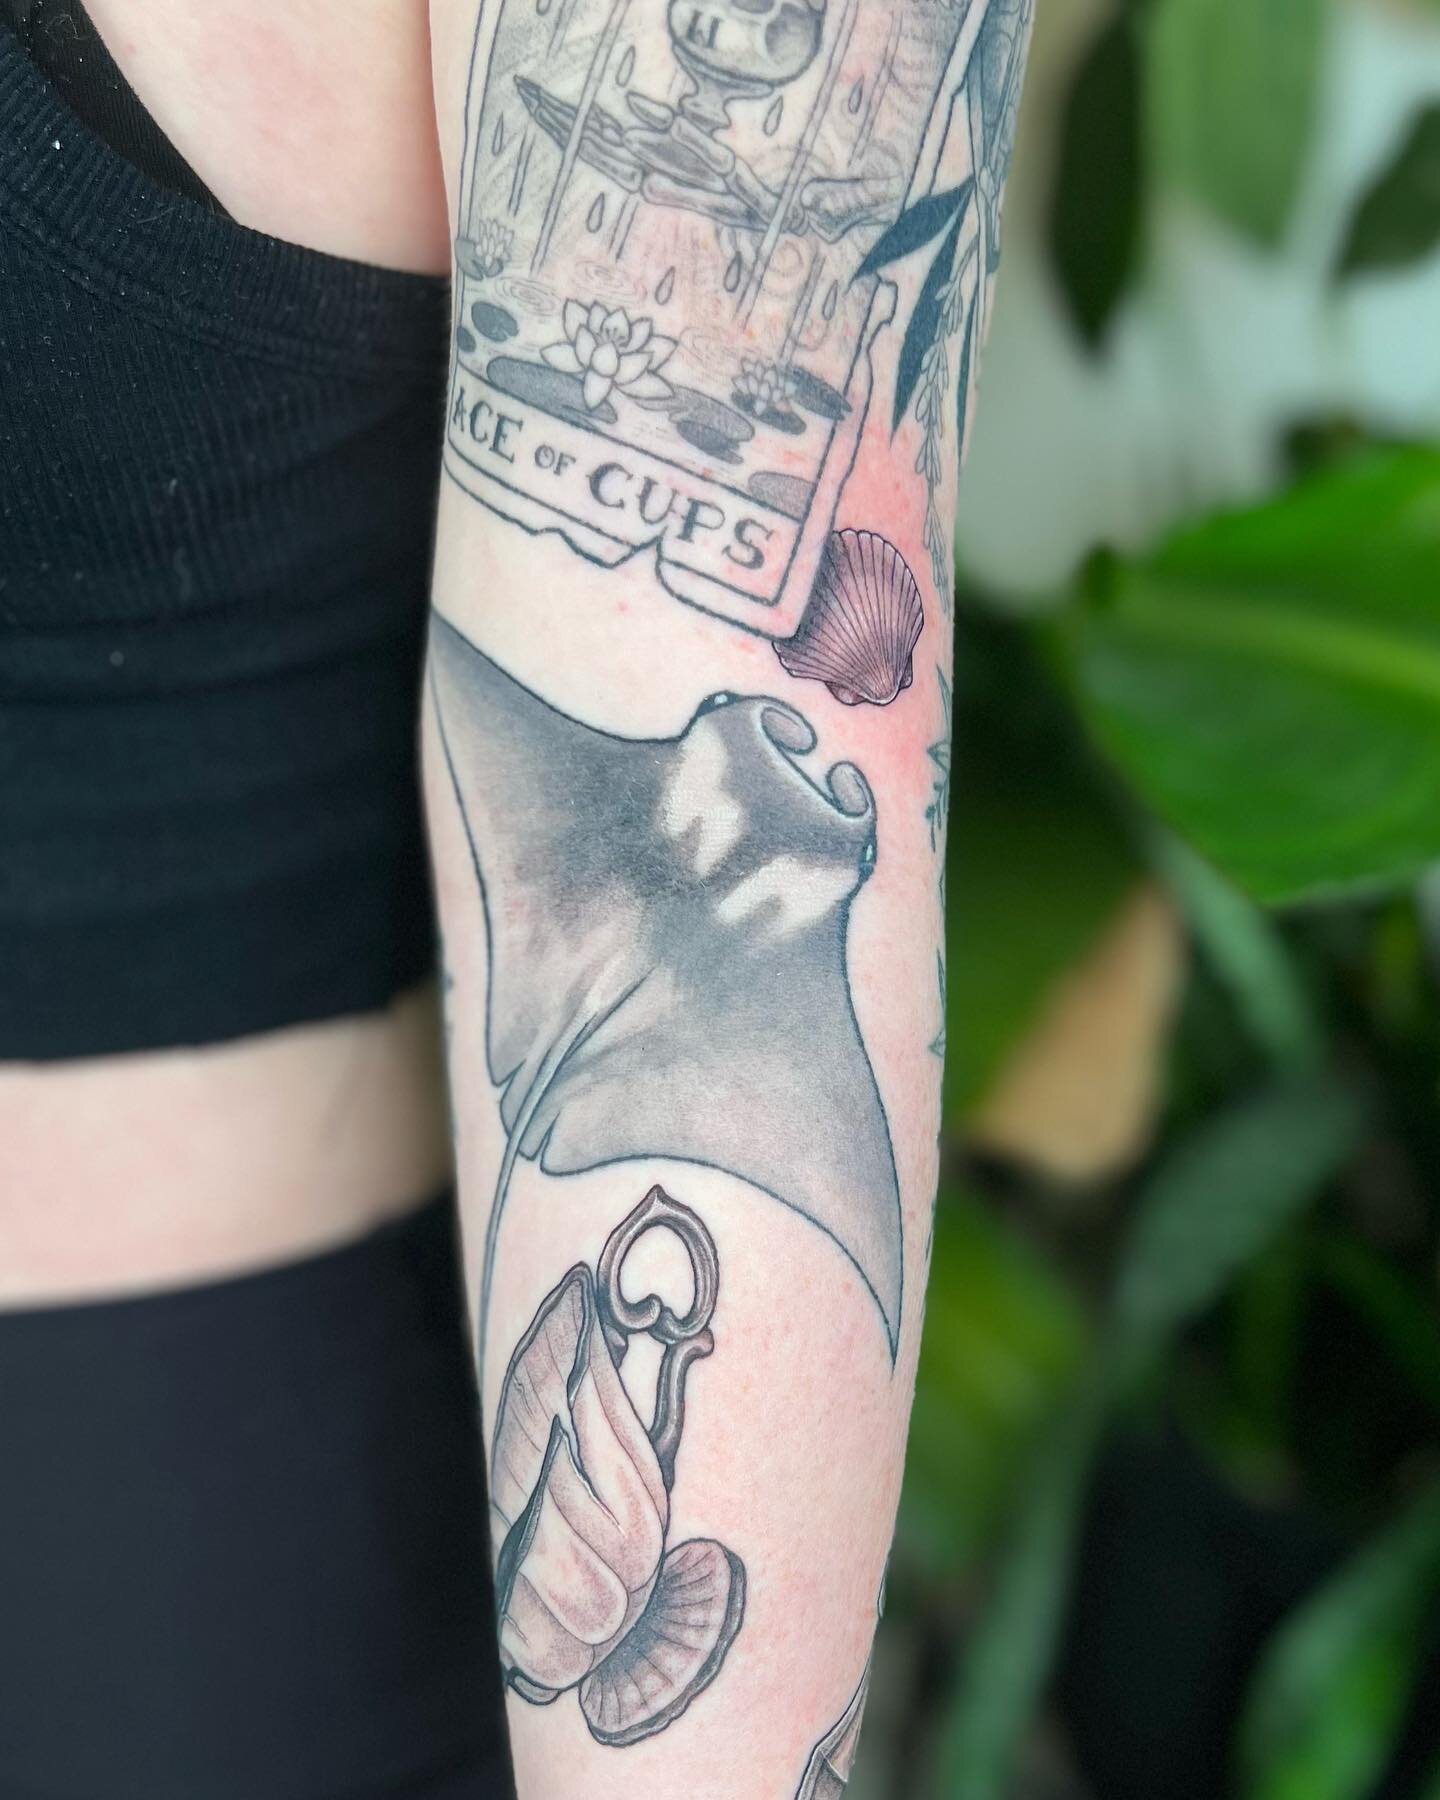 manta ray
healed manta ray and tarot cards for kaitlyn. fresh shell and tea cup. having so much fun piecing together this sleeve with her!
&bull;
#RayCorsonTattoo 
#DallasTattooArtist 
#TexasTattoos
#FemaleTattooer 
#MantaRay 
#MantaRayTattoo 
#Shell